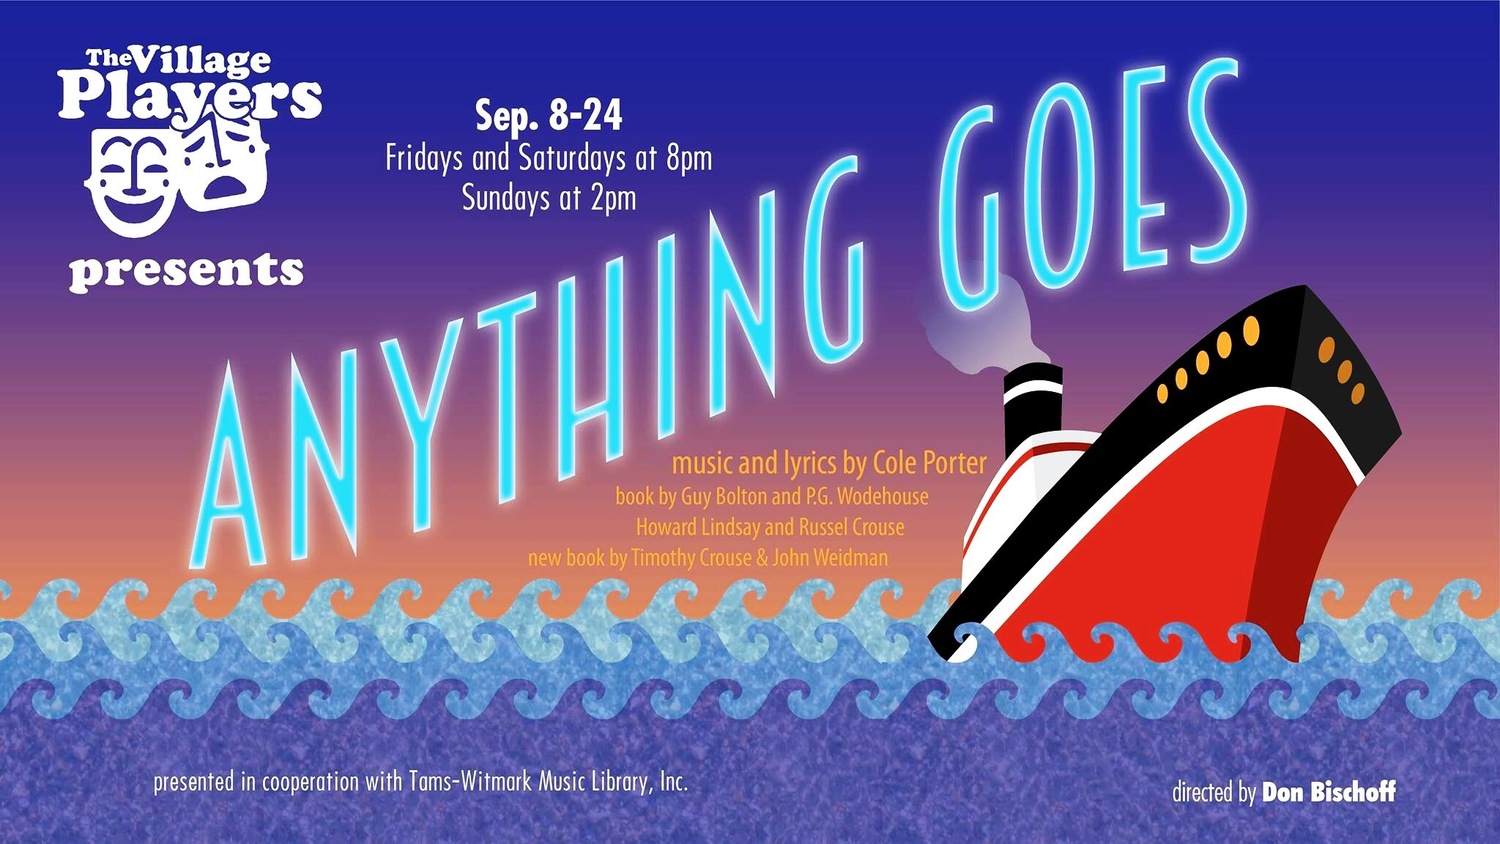 Anything Goes” aboard this mad cap ocean liner as Reno Sweeney (Danielle Caralis of Birmingham) leads the antics in Cole Porter’s musical Anything Goes. Or Reno Sweeney (Danielle Caralis of Birmingham) gets a “Kick Out Of You” in Cole Porter’s madcap musical Anything Goes. 6